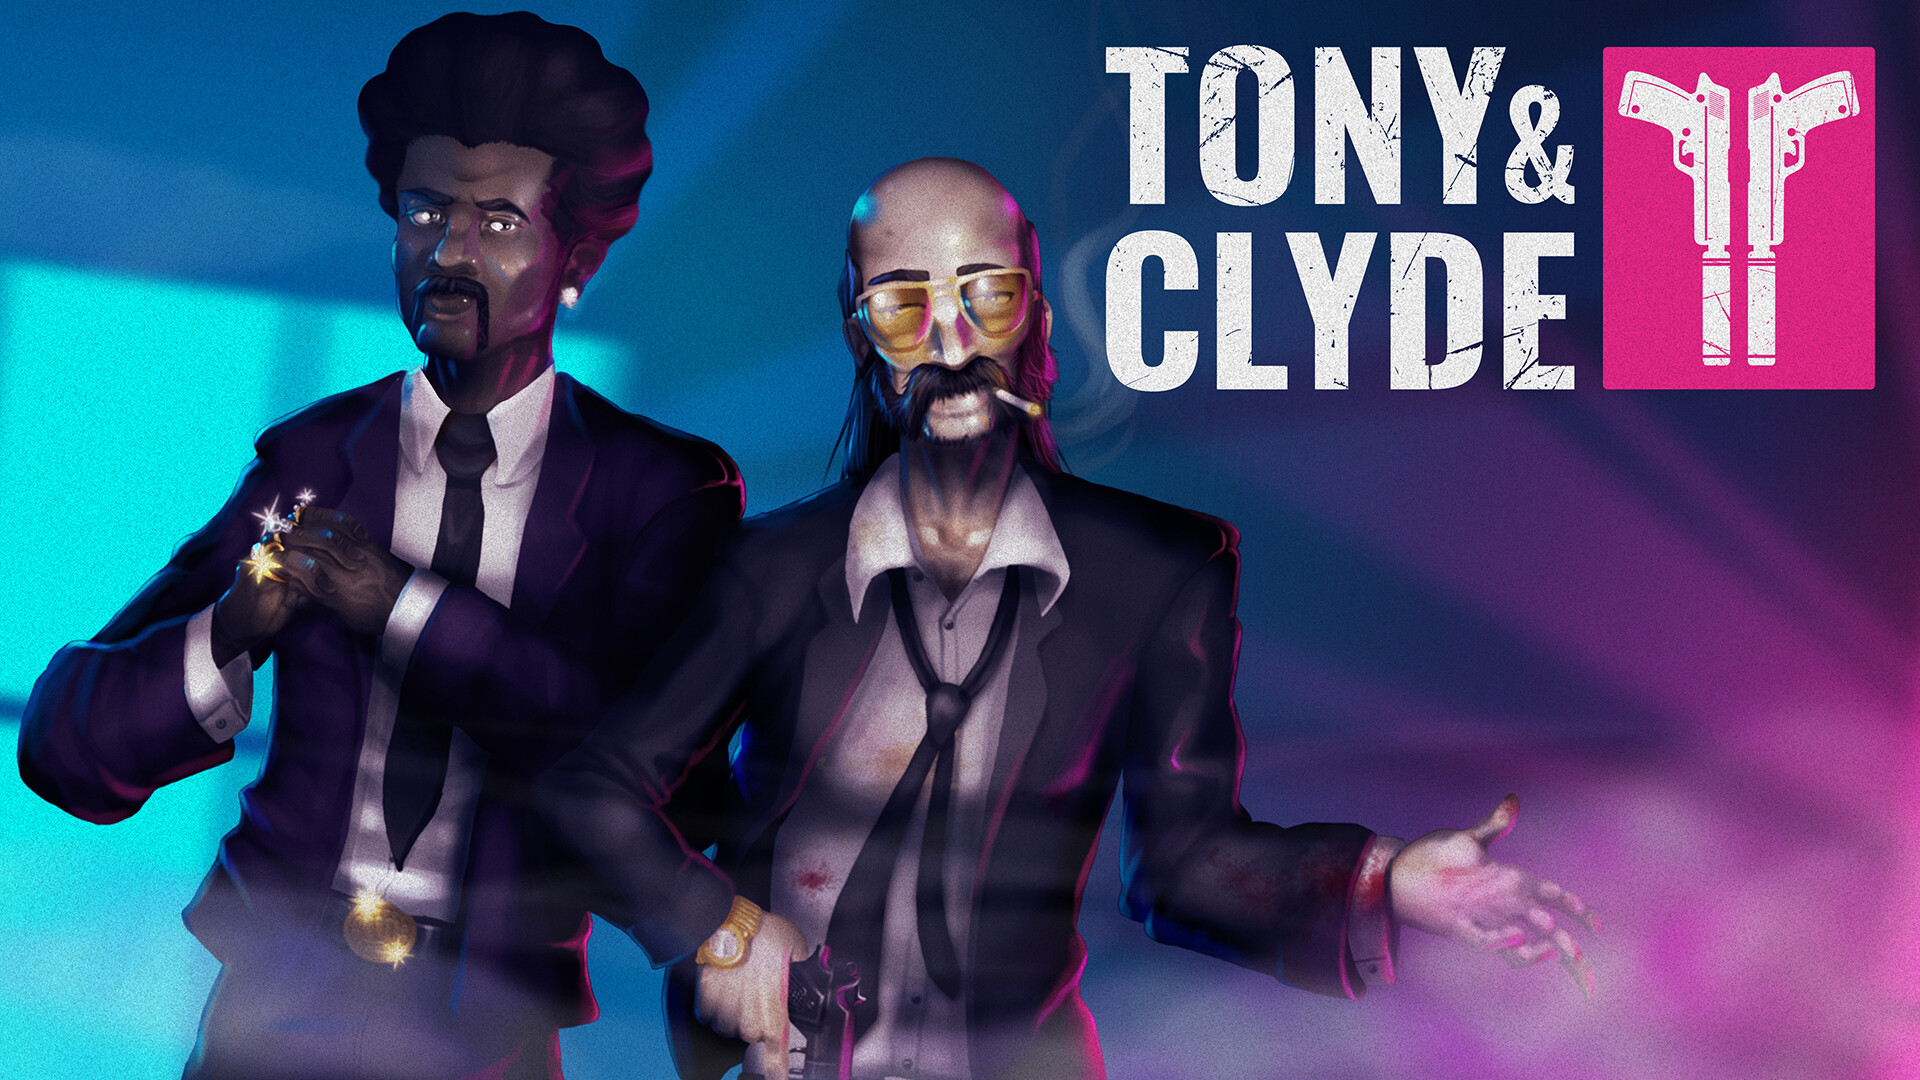 Tony and Clyde 